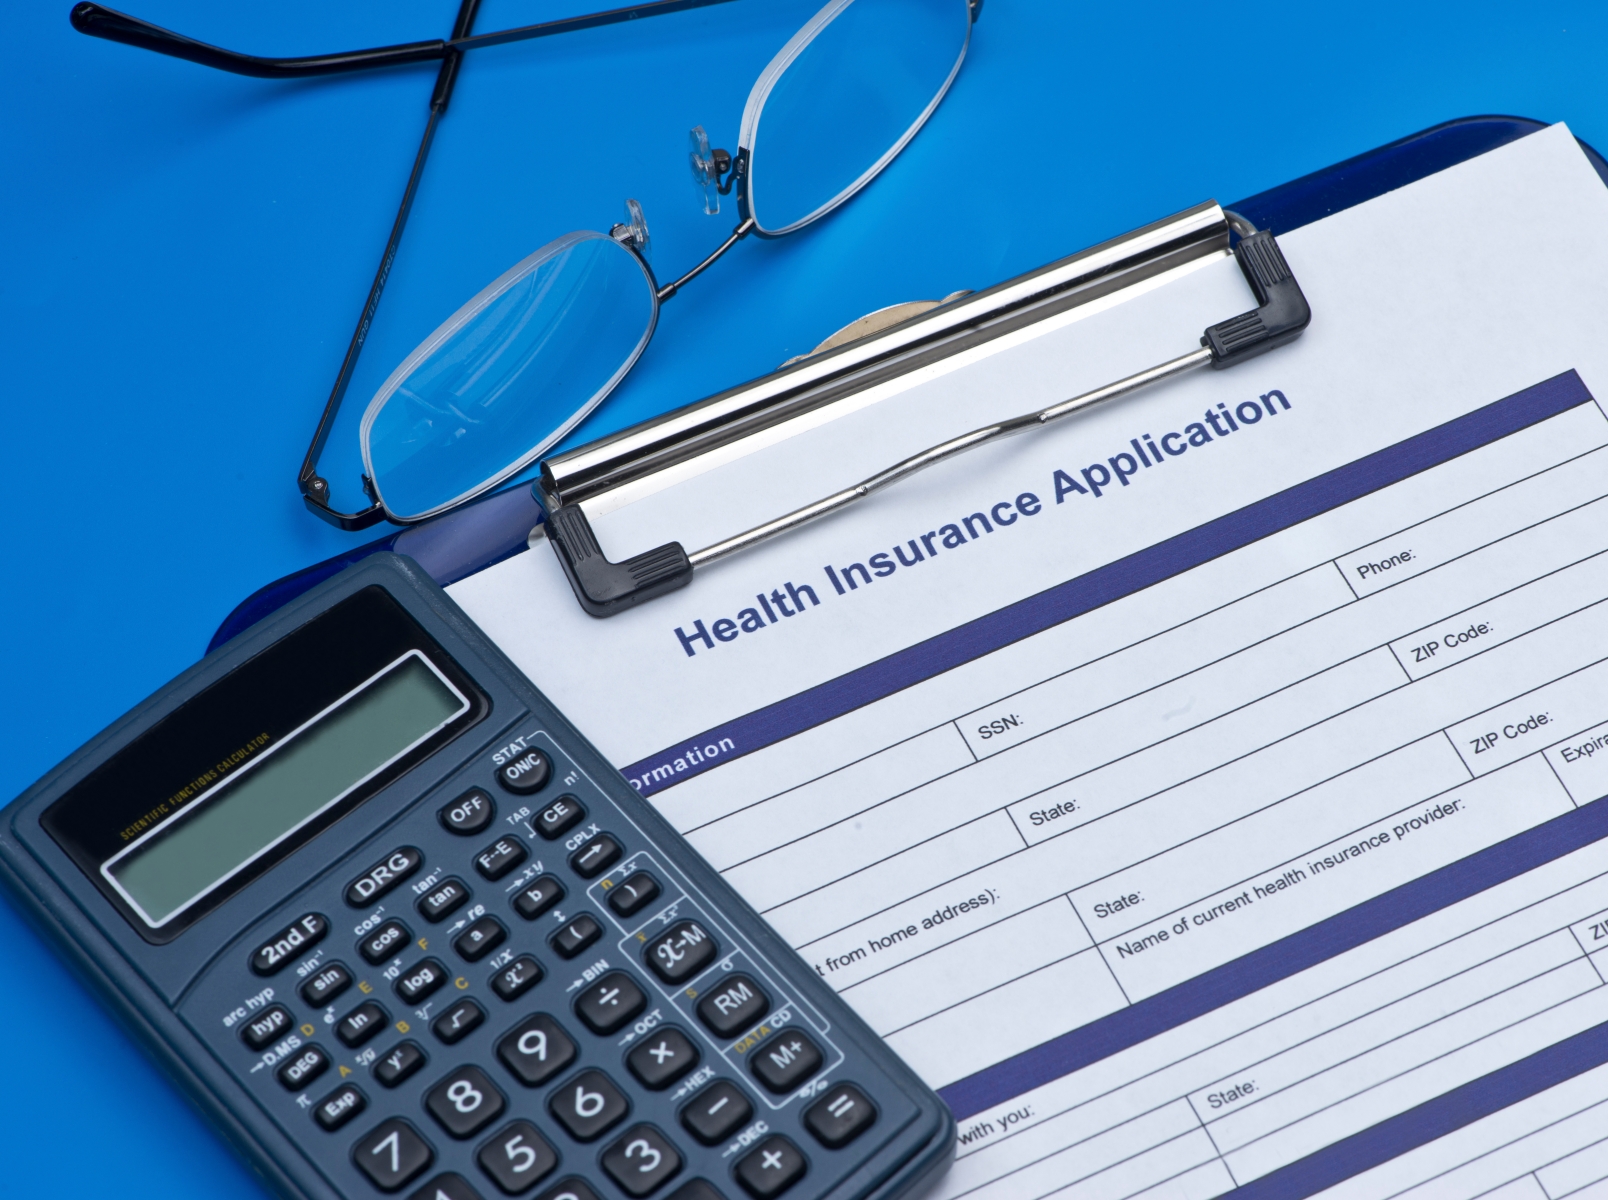 Applying For Health Insurance Card Or Getting It Renewed?